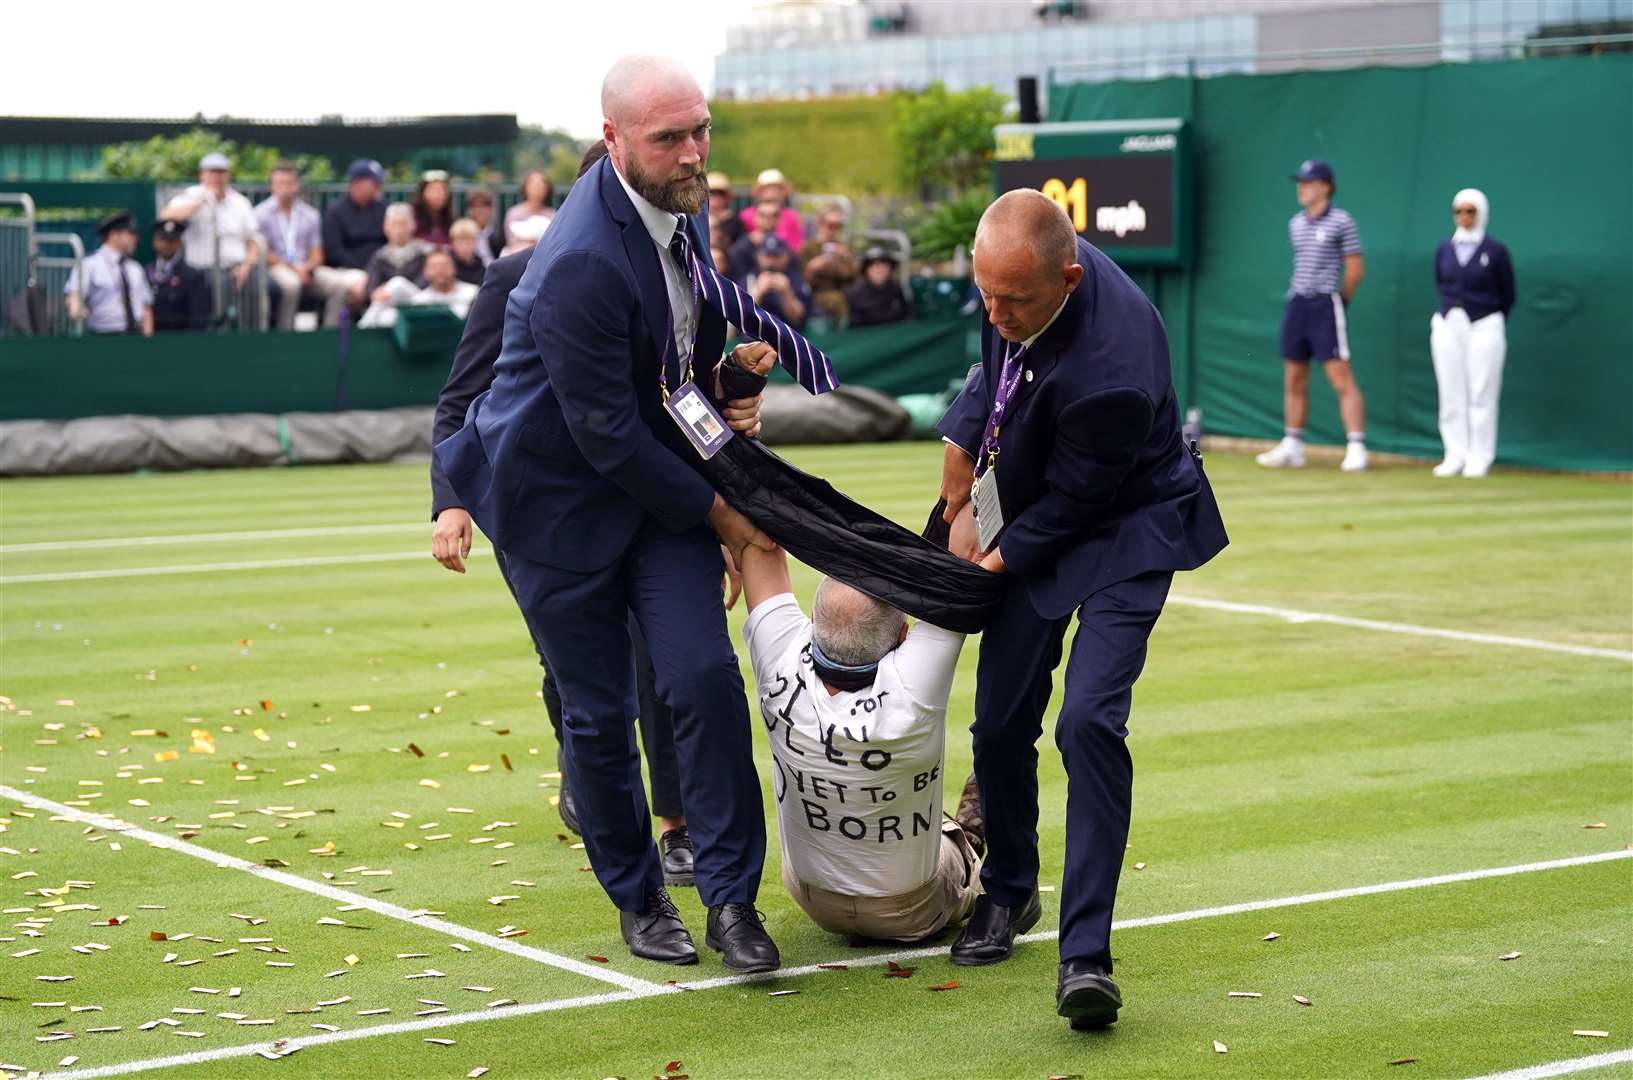 A Just Stop Oil protester is carried off court 18 after throwing confetti on to the grass during a match on day three of the 2023 Wimbledon Championships (Adam Davy/PA)